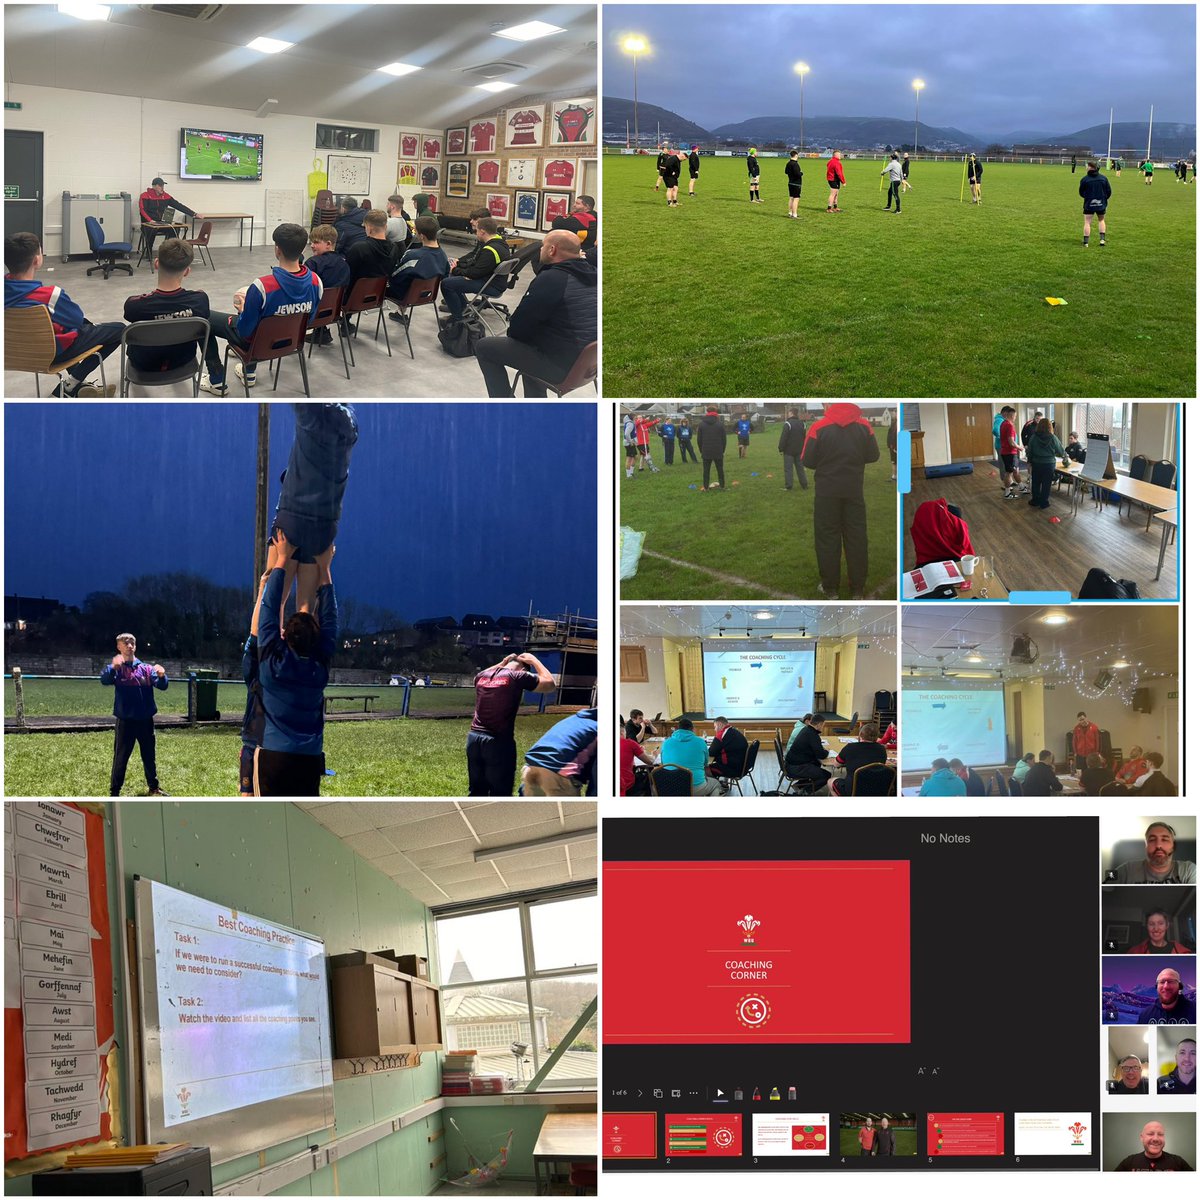 Quality week for Coach & Referee Development in the Ospreys Region ✅ 5 CPD’s delivered by our Hub Officers ✅ Rugby Leaders @PencoedPE ✅ FGL2 @KenfigHillRFC ✅ Coaches Corner - How Skills ✅ Referee Corner - Scrum ✅ Level 3 Observations Well done to everyone involved 🔥🙌